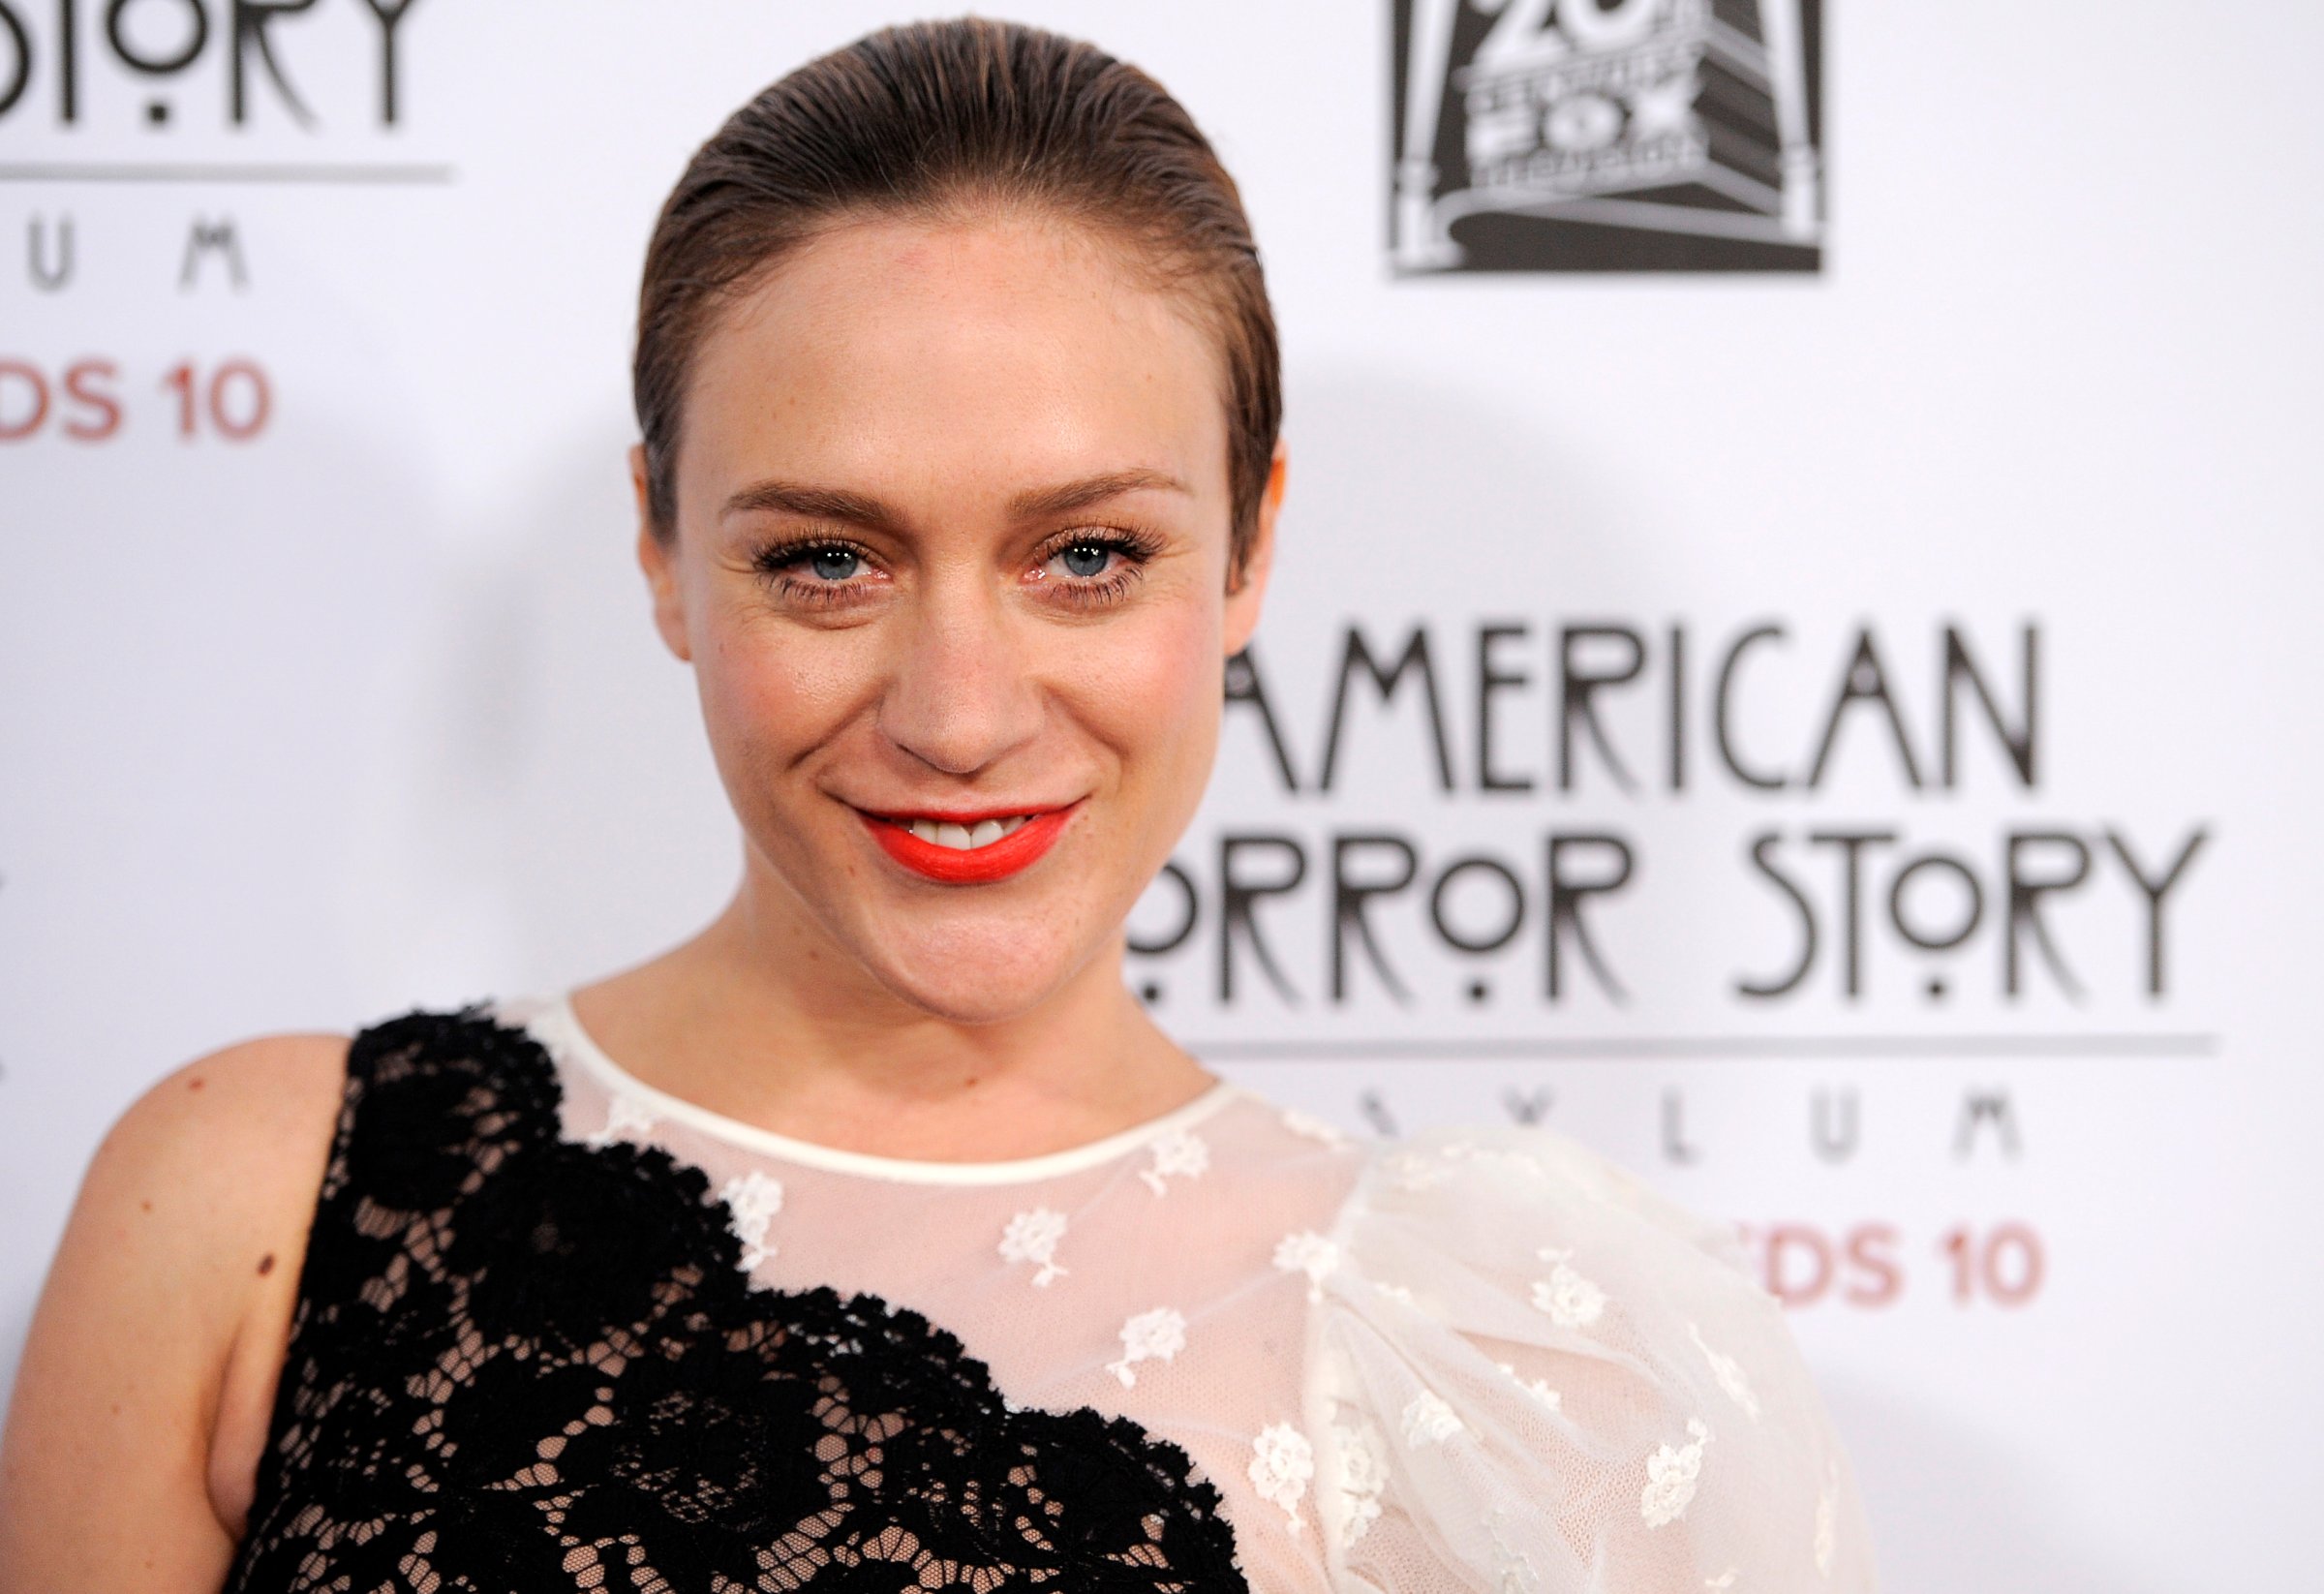 Chloe Sevigny poses at the premiere screening of "American Horror Story: Asylum" in Los Angeles on Oct. 13, 2012.